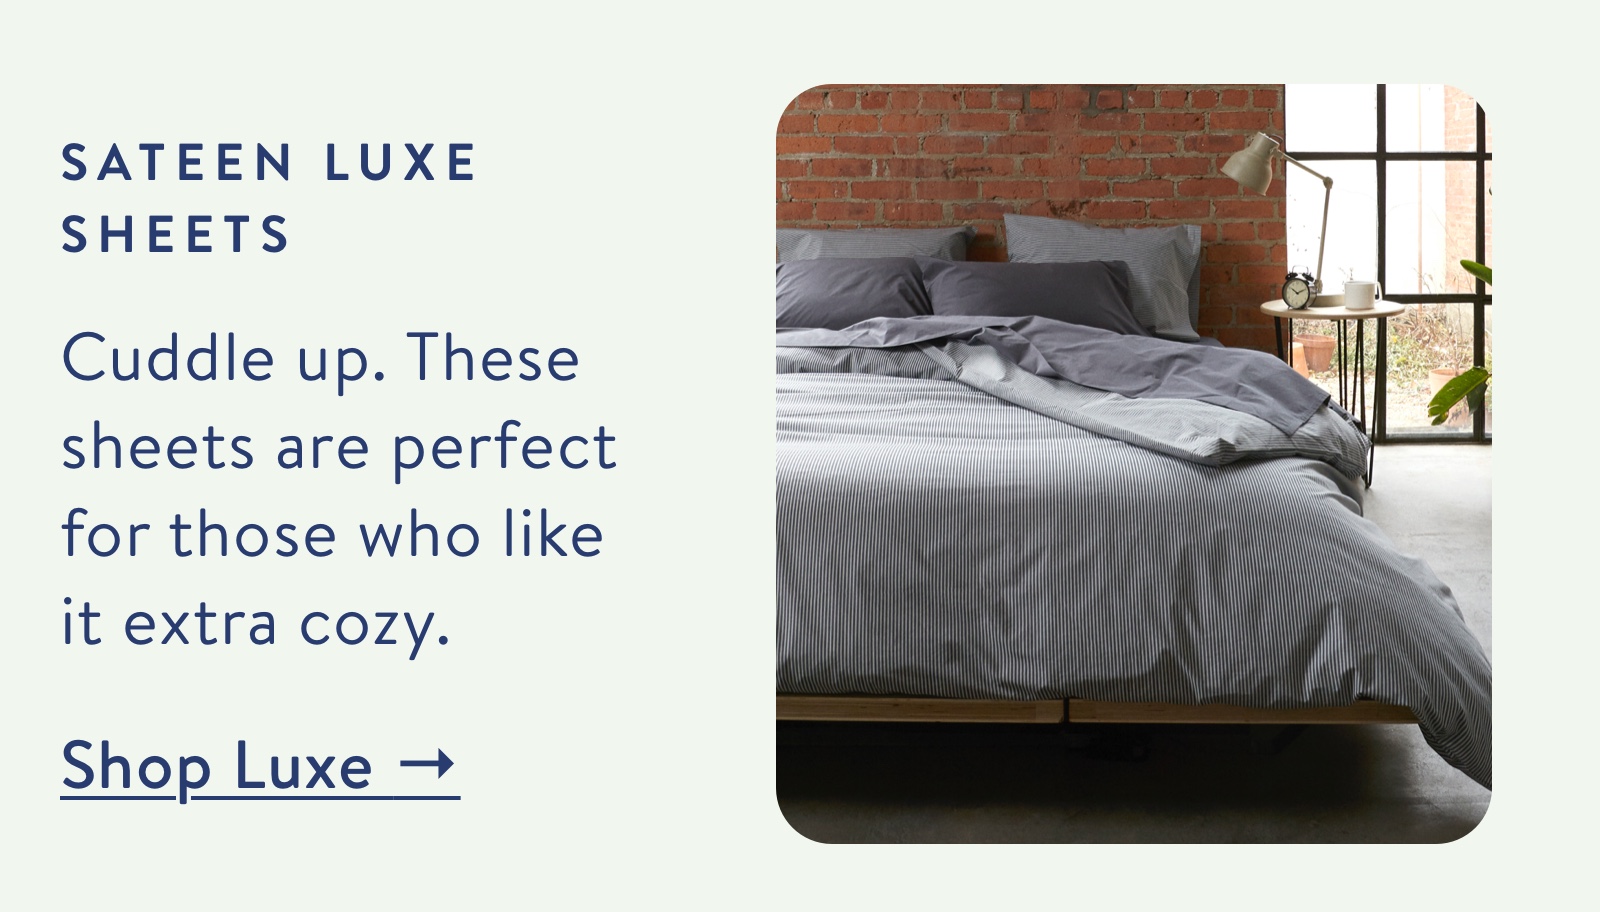 Sateen Luxe Sheets